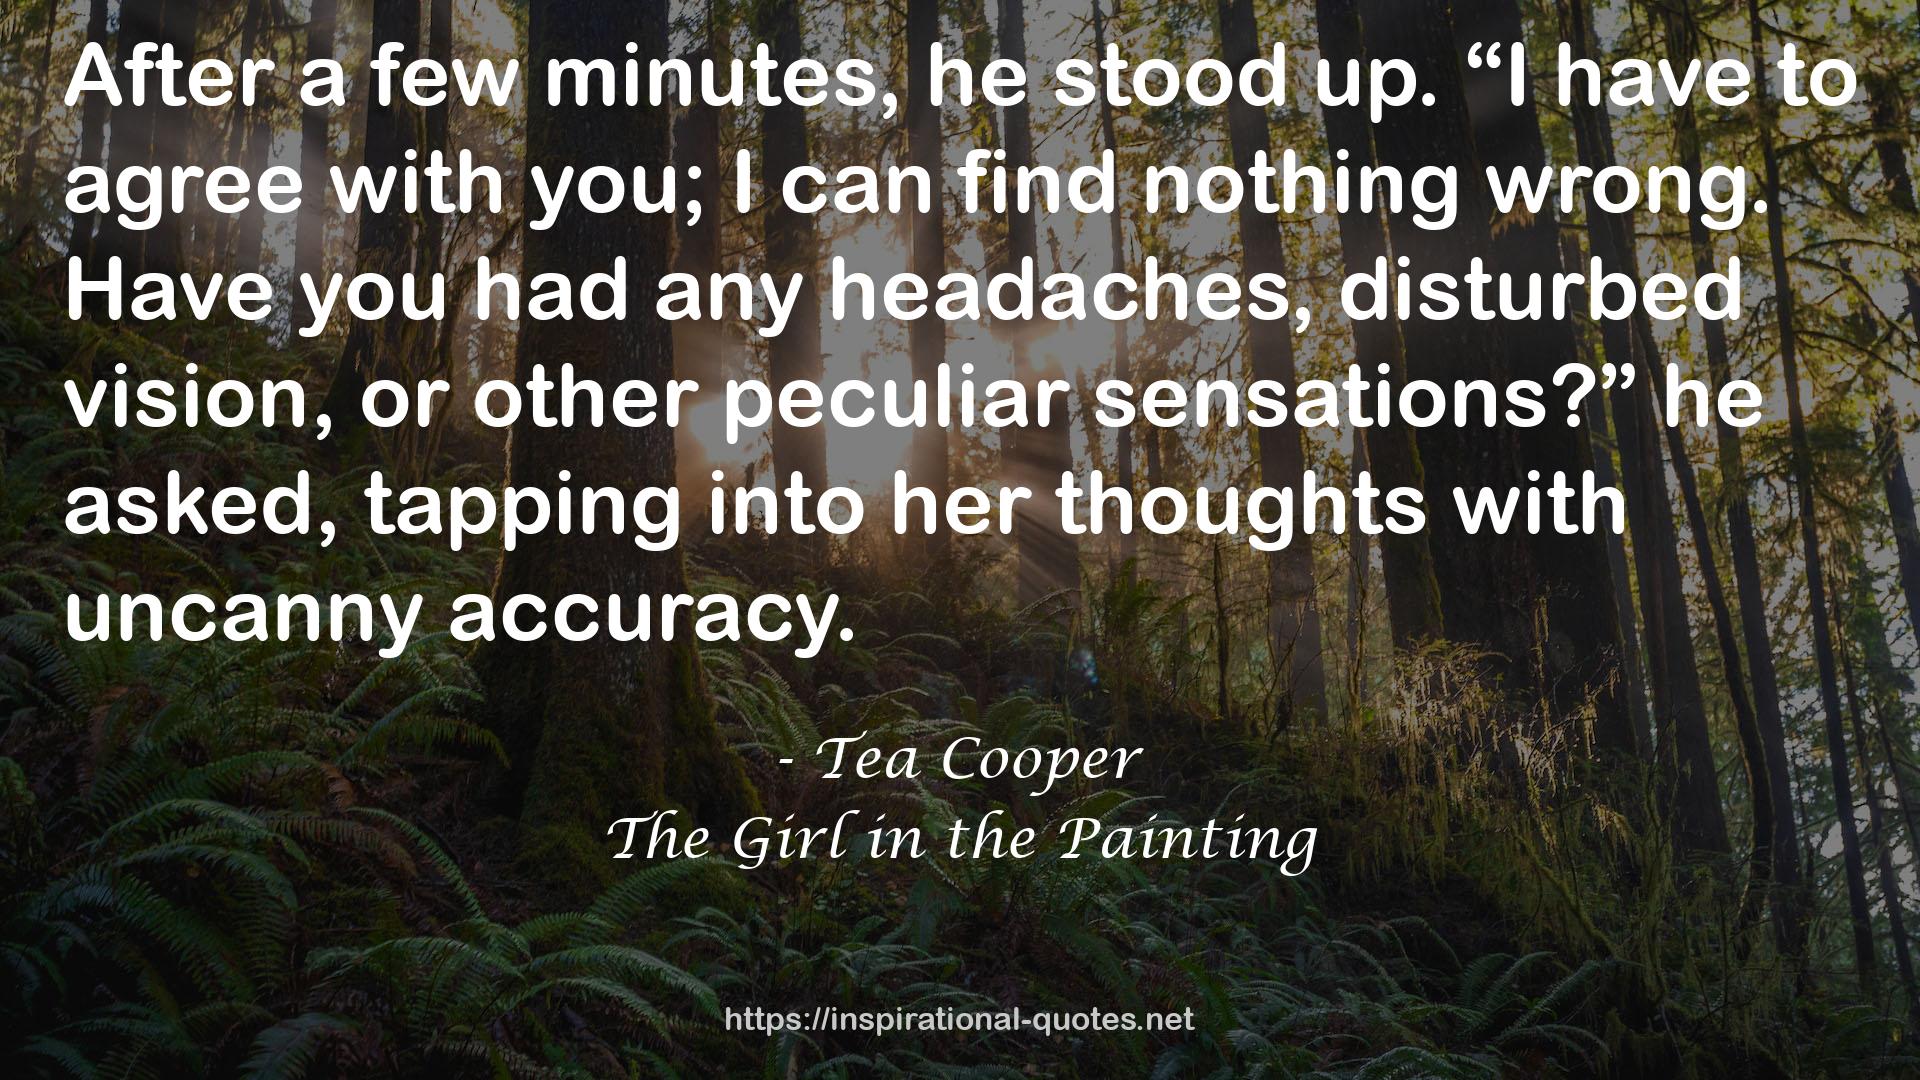 The Girl in the Painting QUOTES